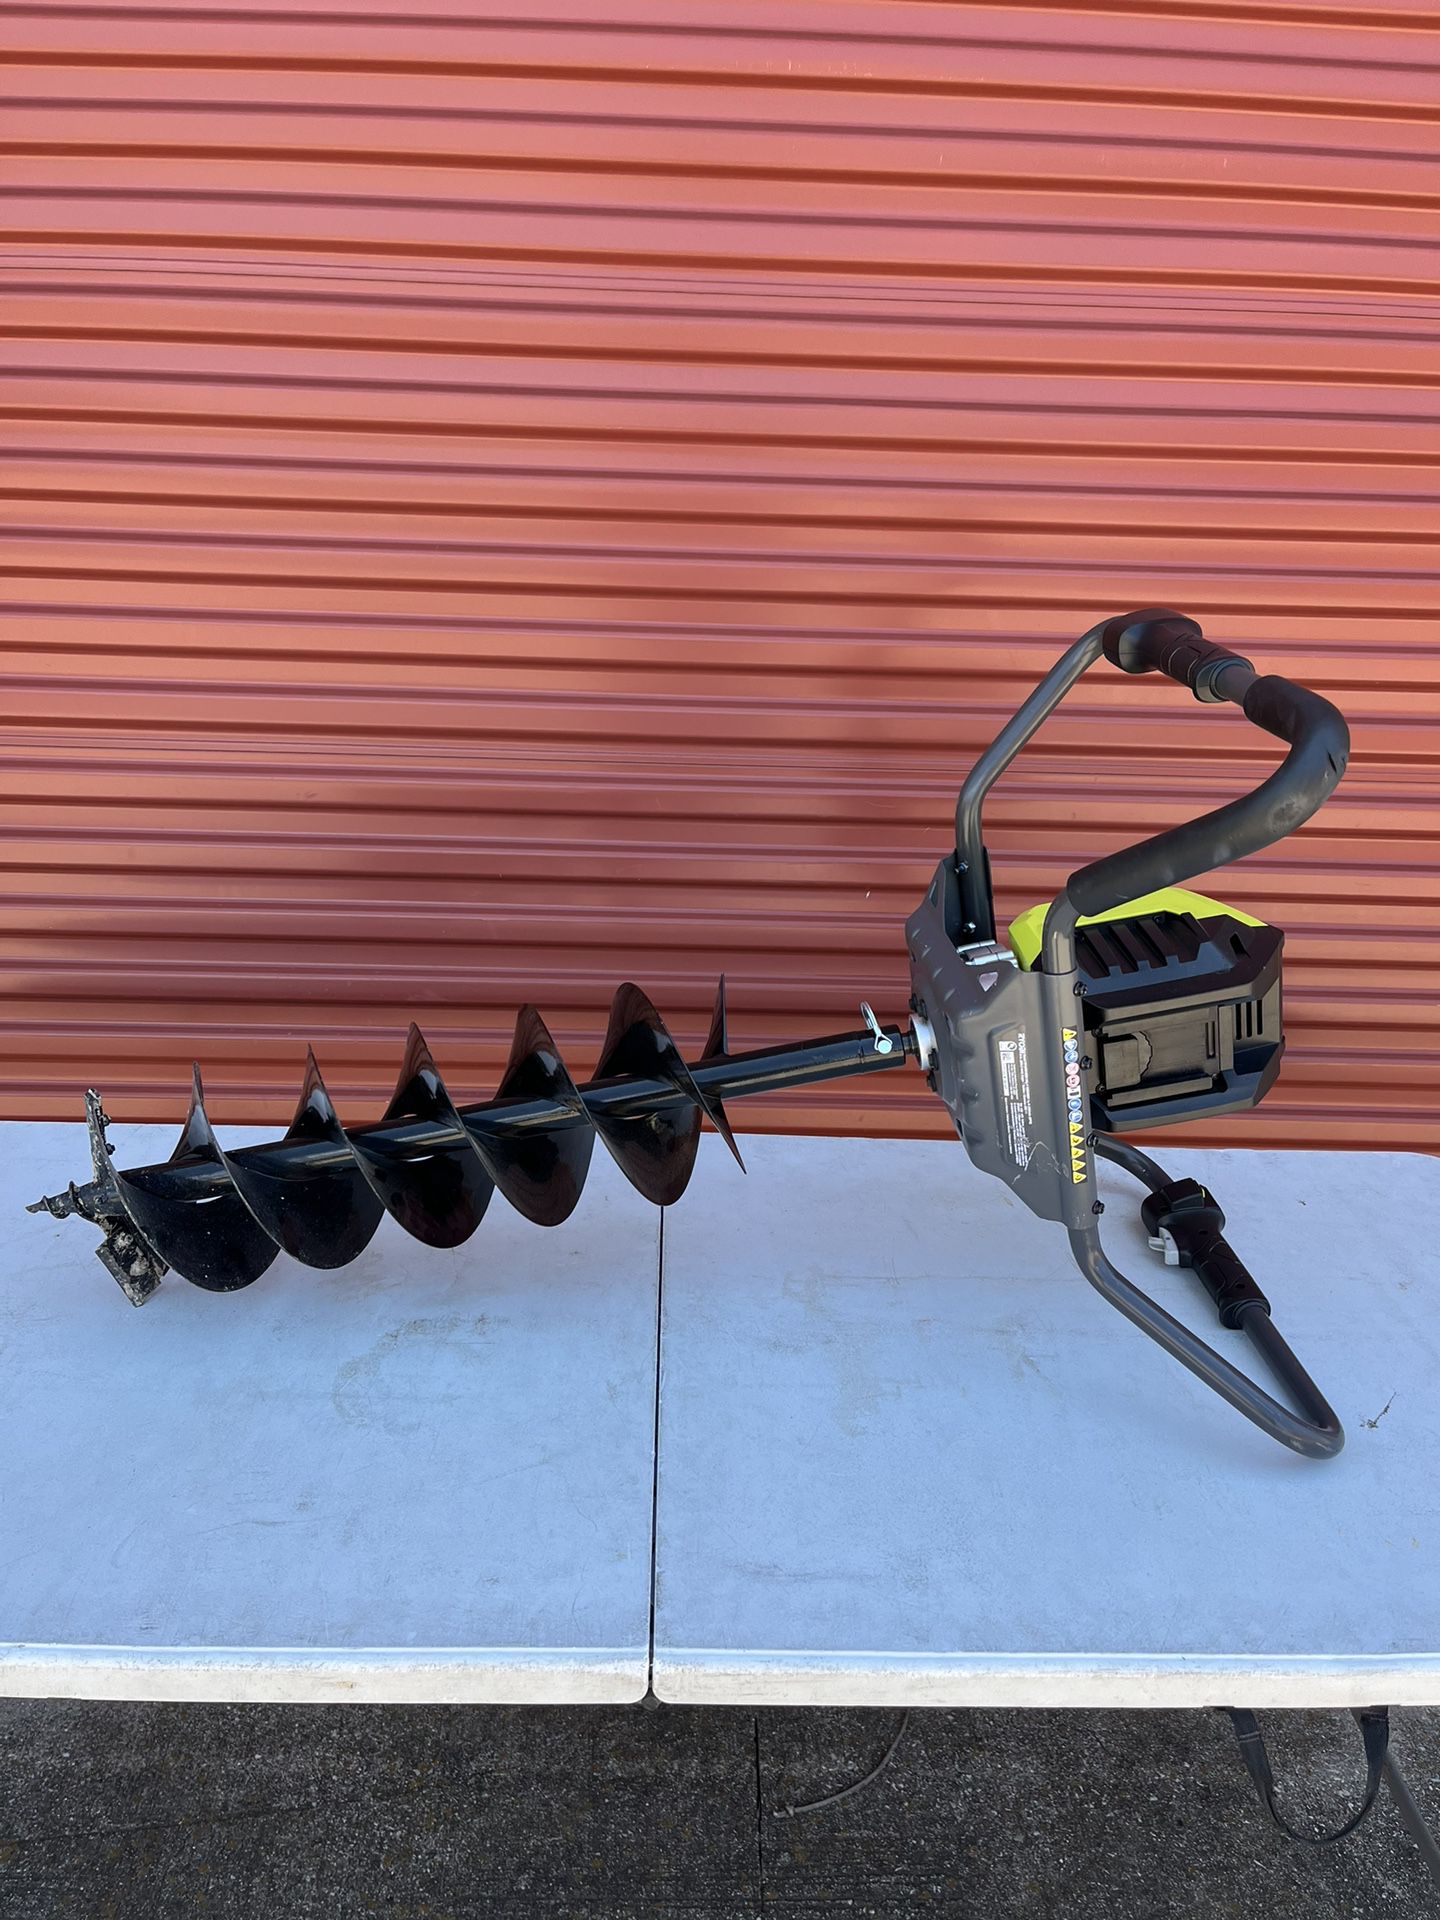 RYOBI 40V HP Brushless Cordless Earth Auger Powerhead with 8 in Depth 36” Long Bit. (Tool Only)